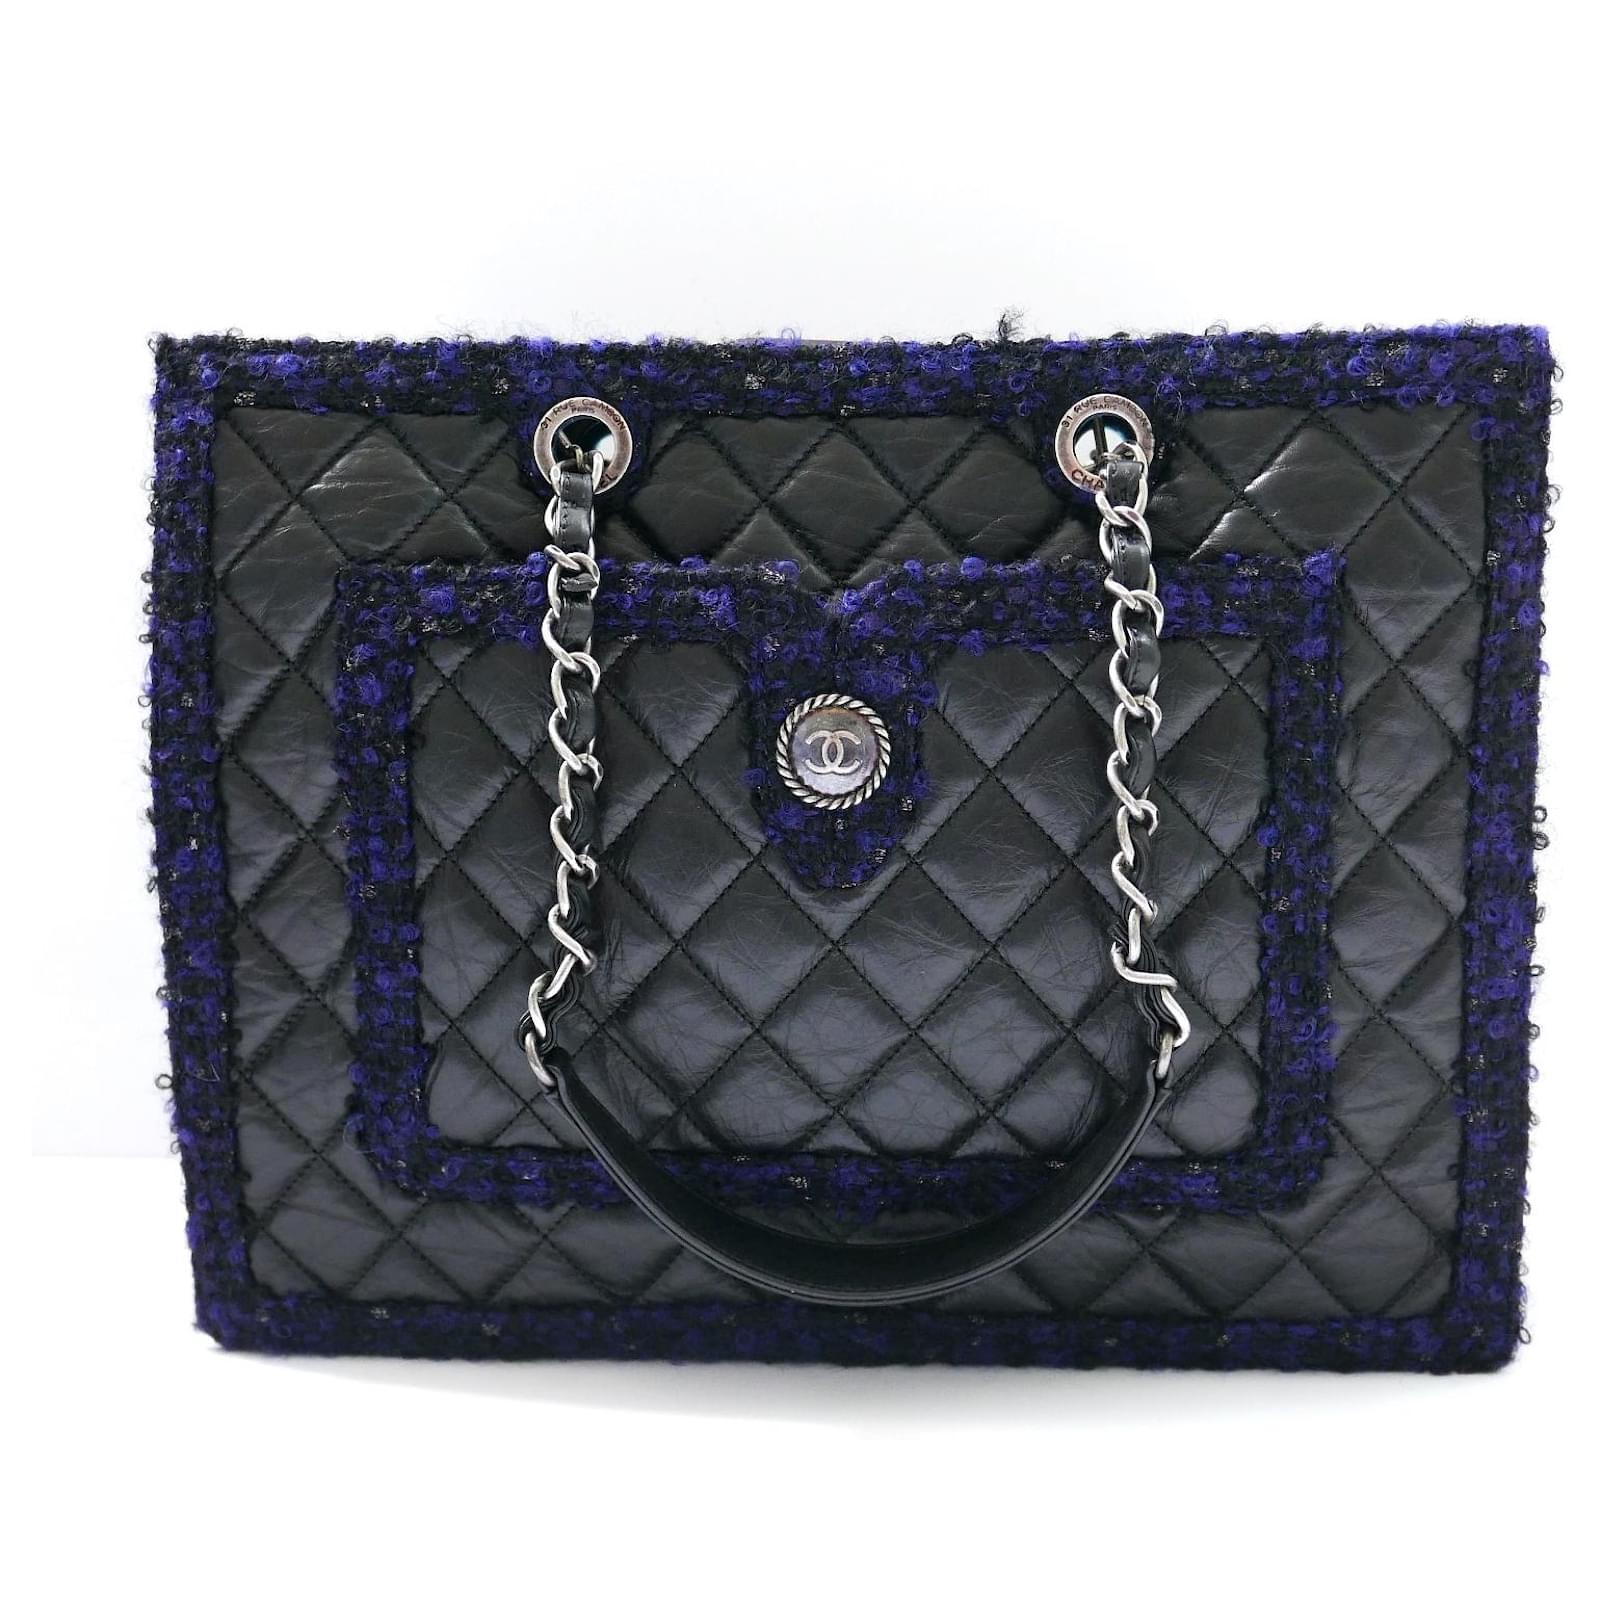 Chanel Large Navy Canvas With Sequins Deauville Tote